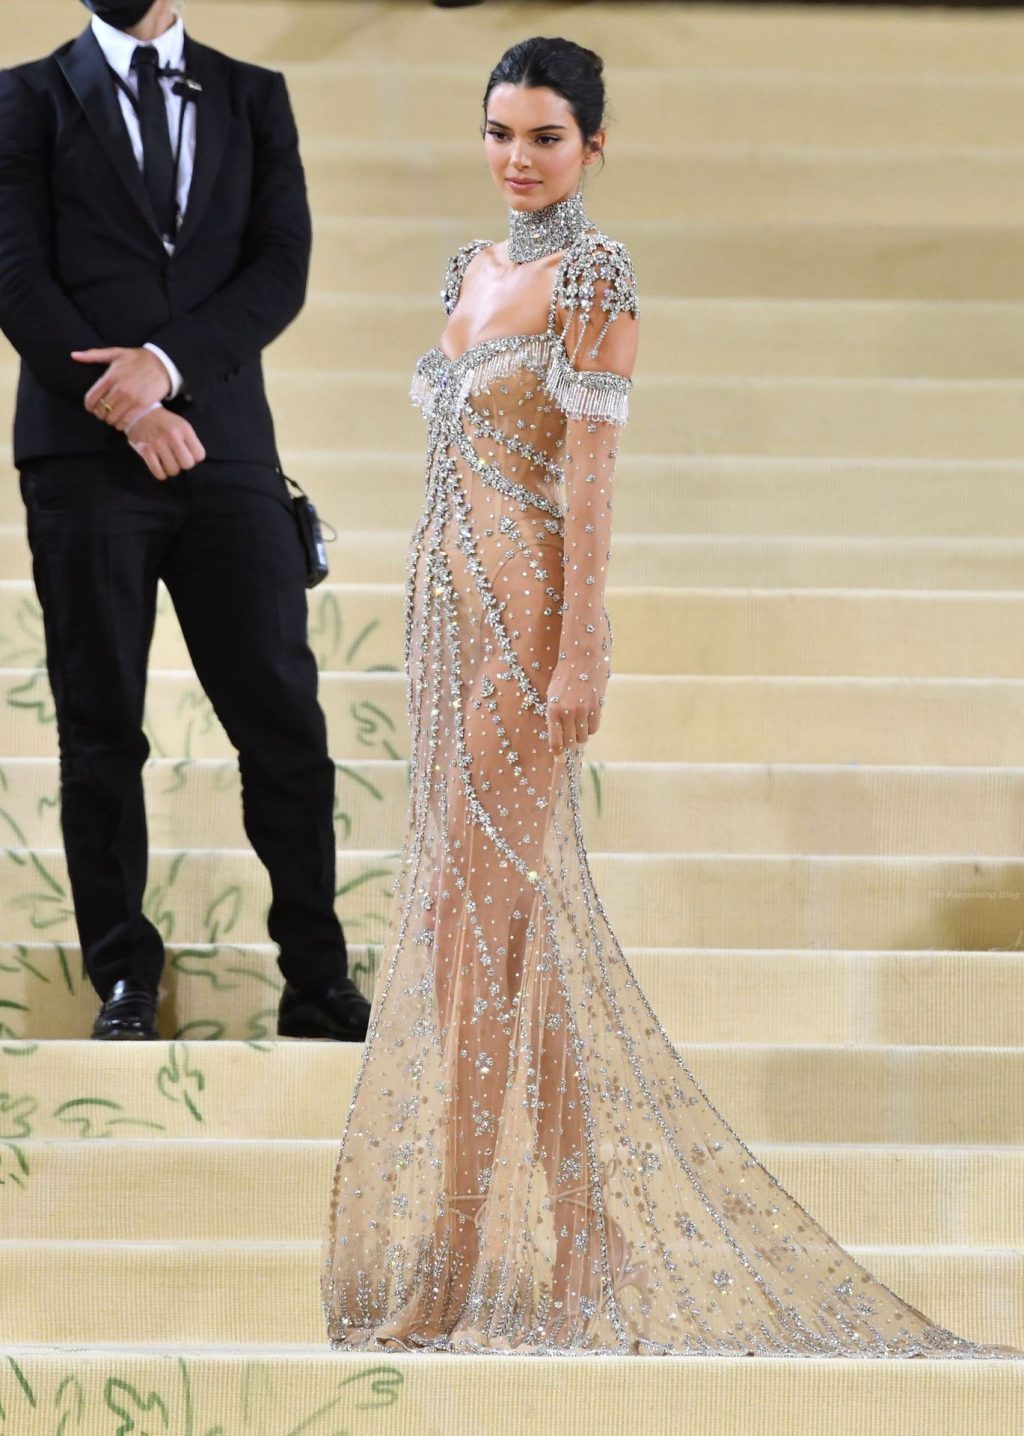 Kendall Jenner Poses in a ‘Naked’ Dress at the 2021 Met Gala (150 Photos)